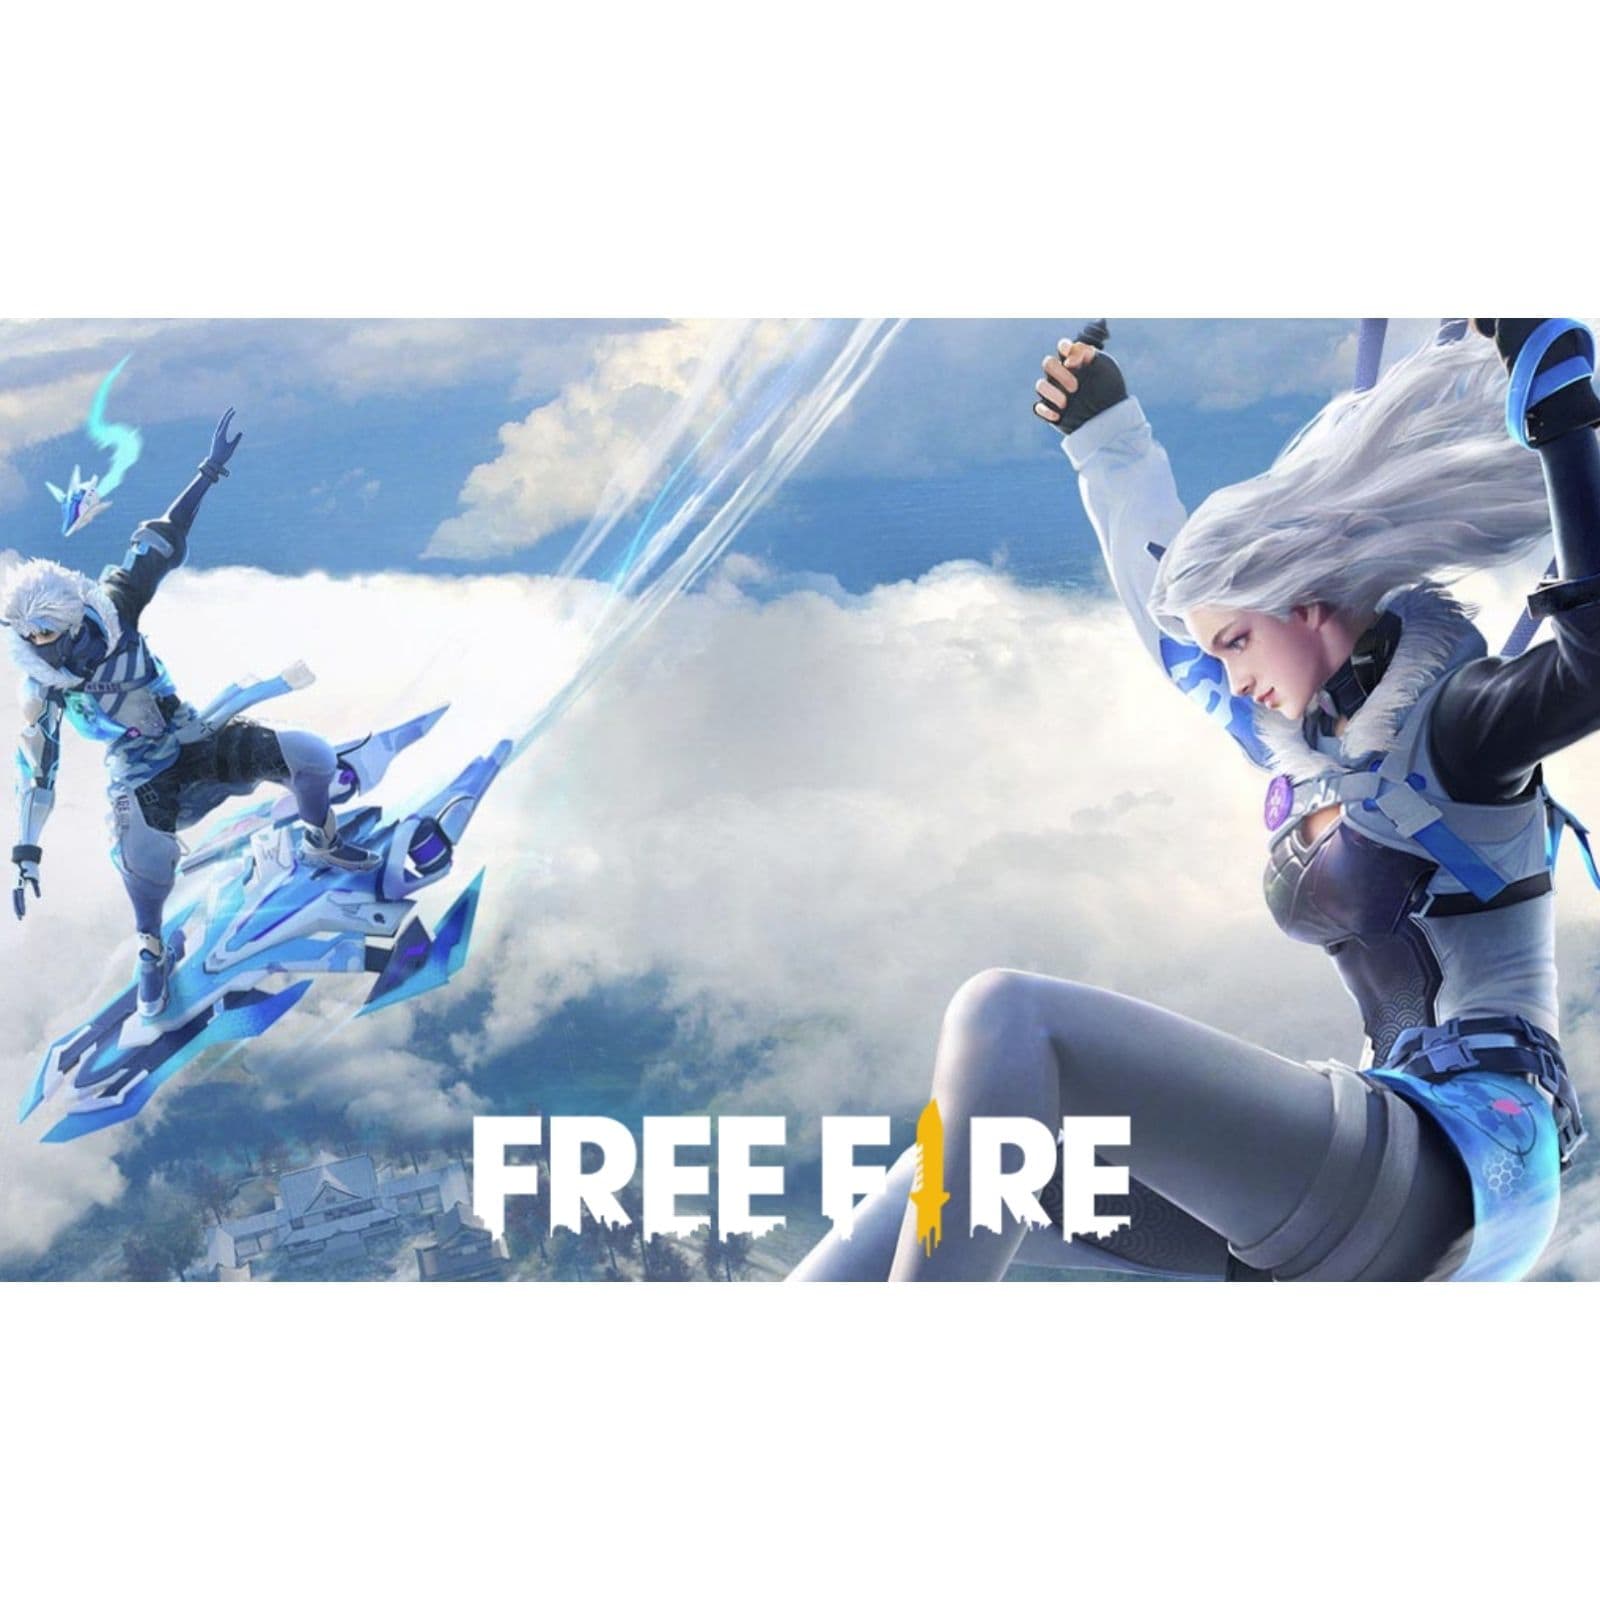 Free fire images